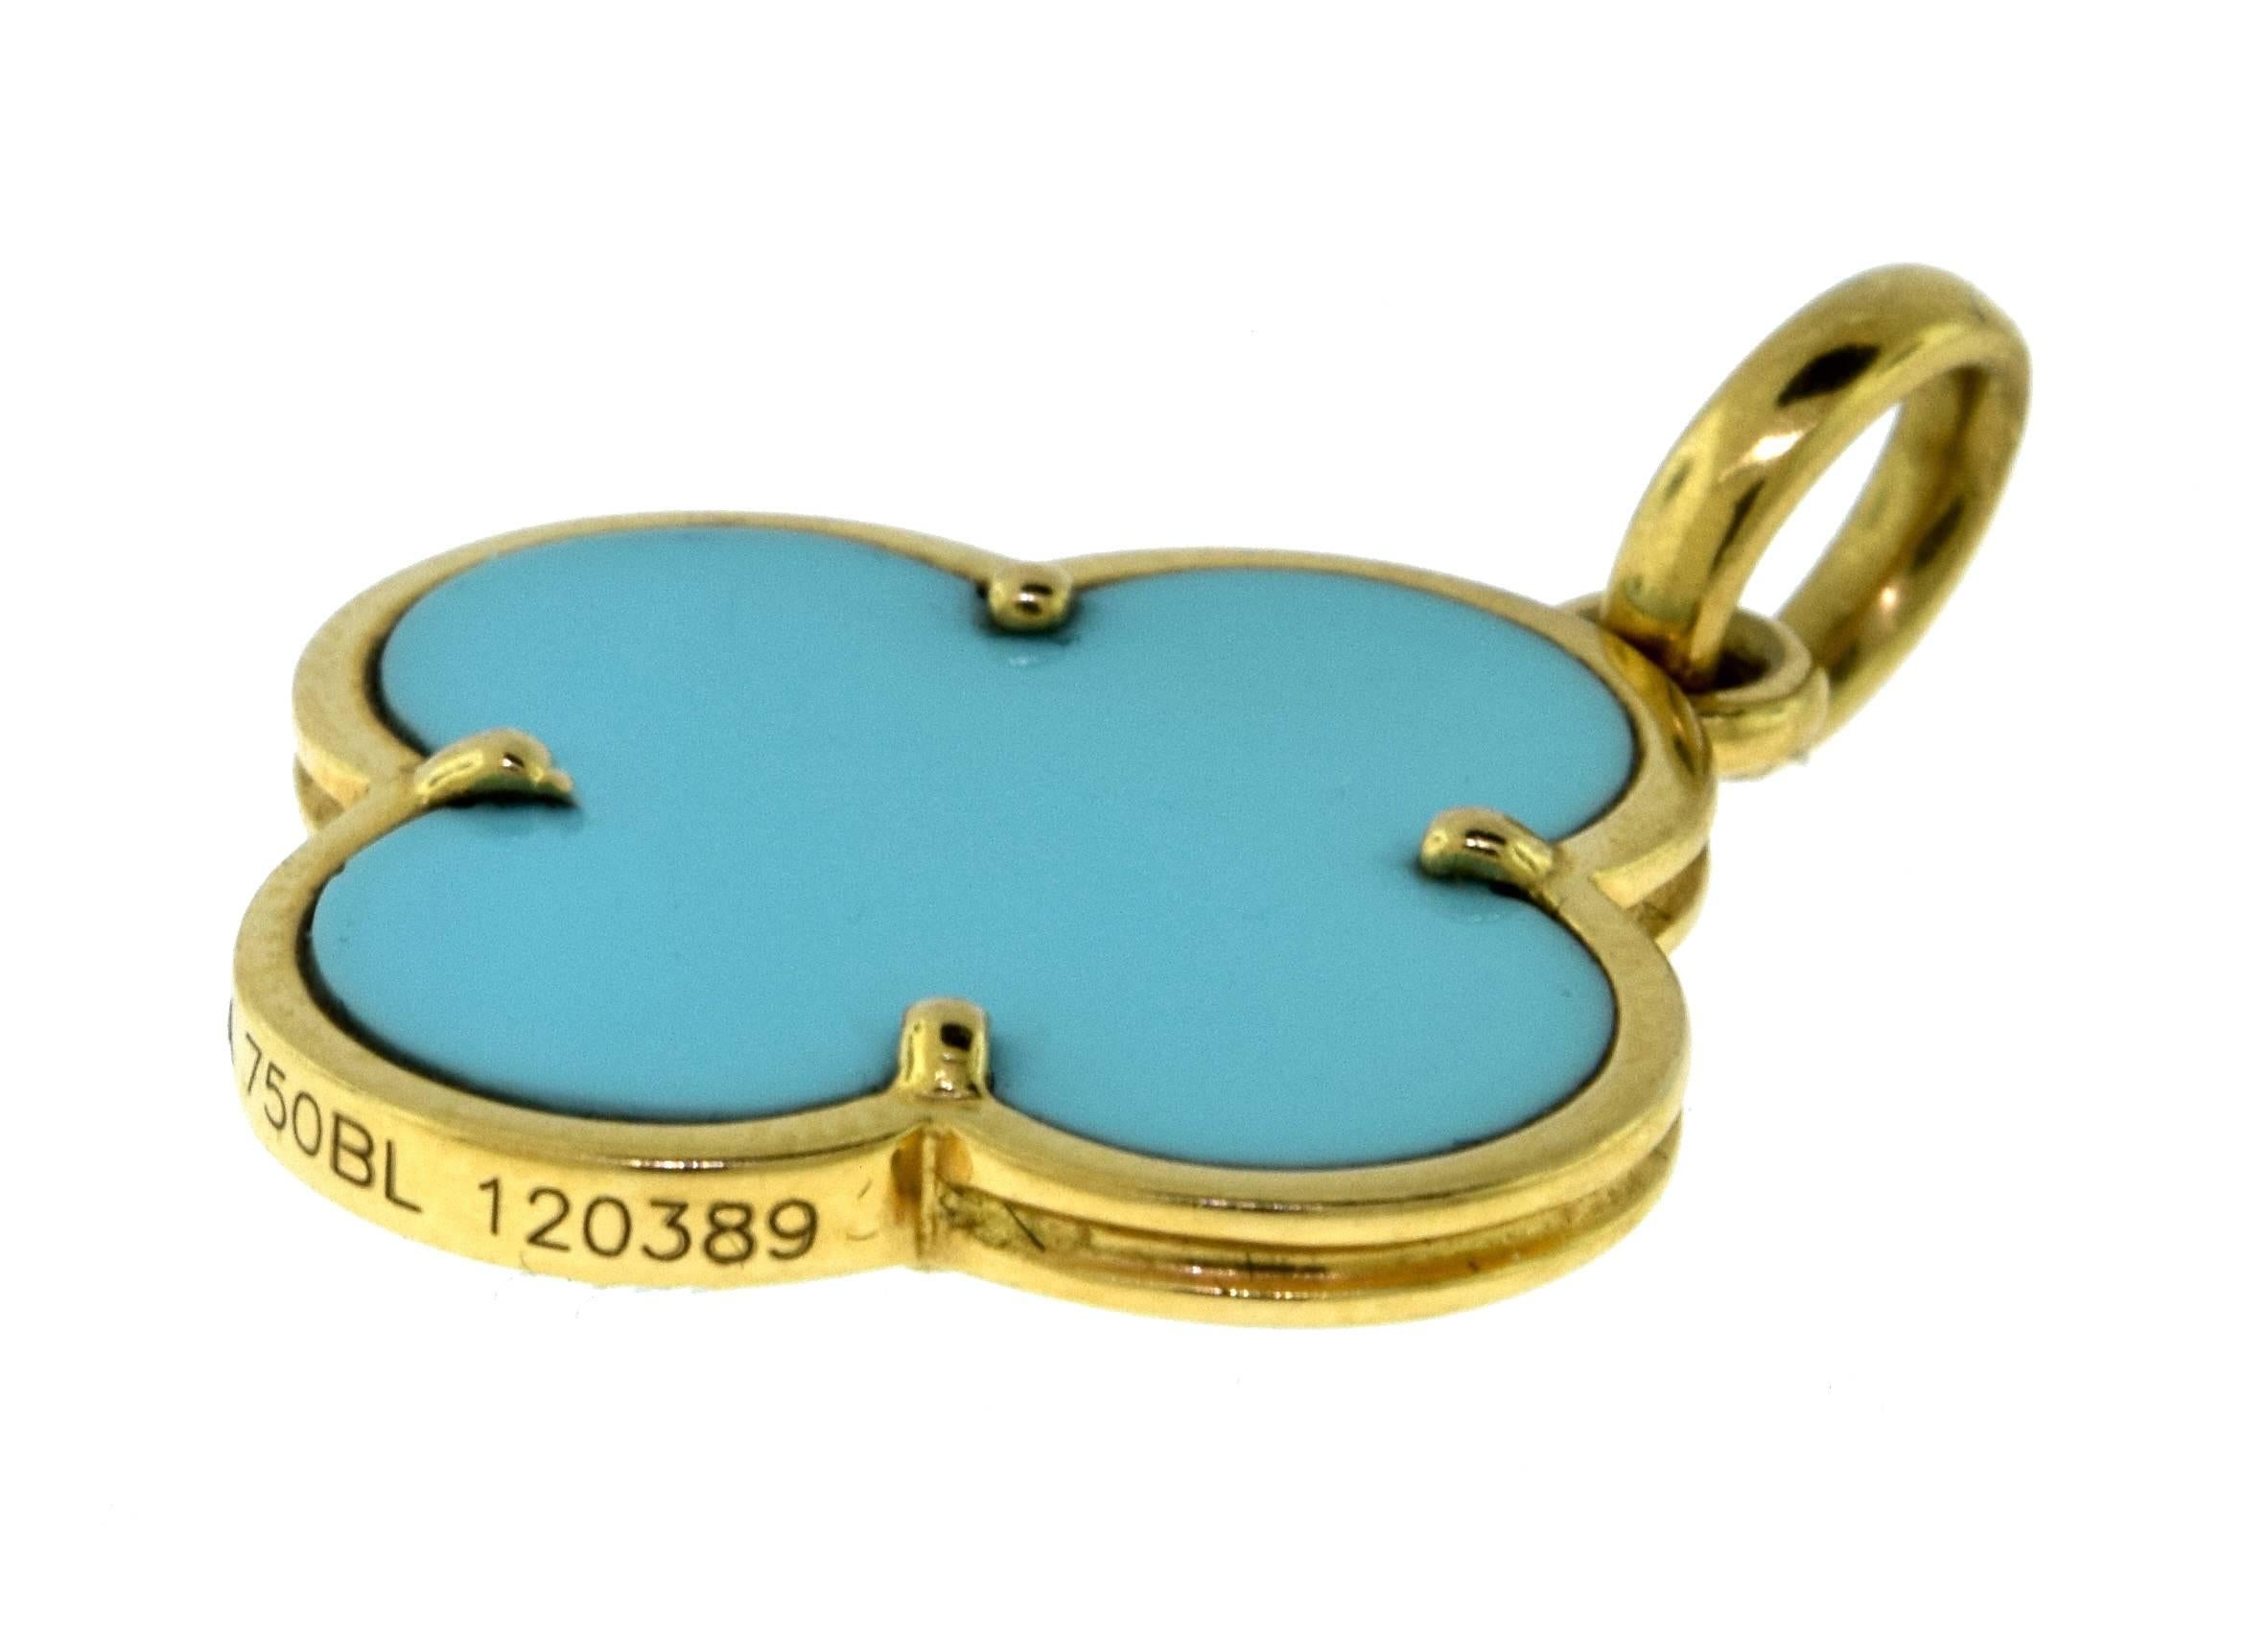 From Van Cleef & Arpel's Magic Alhambra Collection

Metal: 18K Yellow Gold
Metal Finish: High Polish
Stone Type: Turquoise
Stone Color: Blue
Total Item Weight (g): 3.8
Hallmark: VCA 750 French Eagle Head Serial No.
Dimensions: 1.2 x 0.87 inches